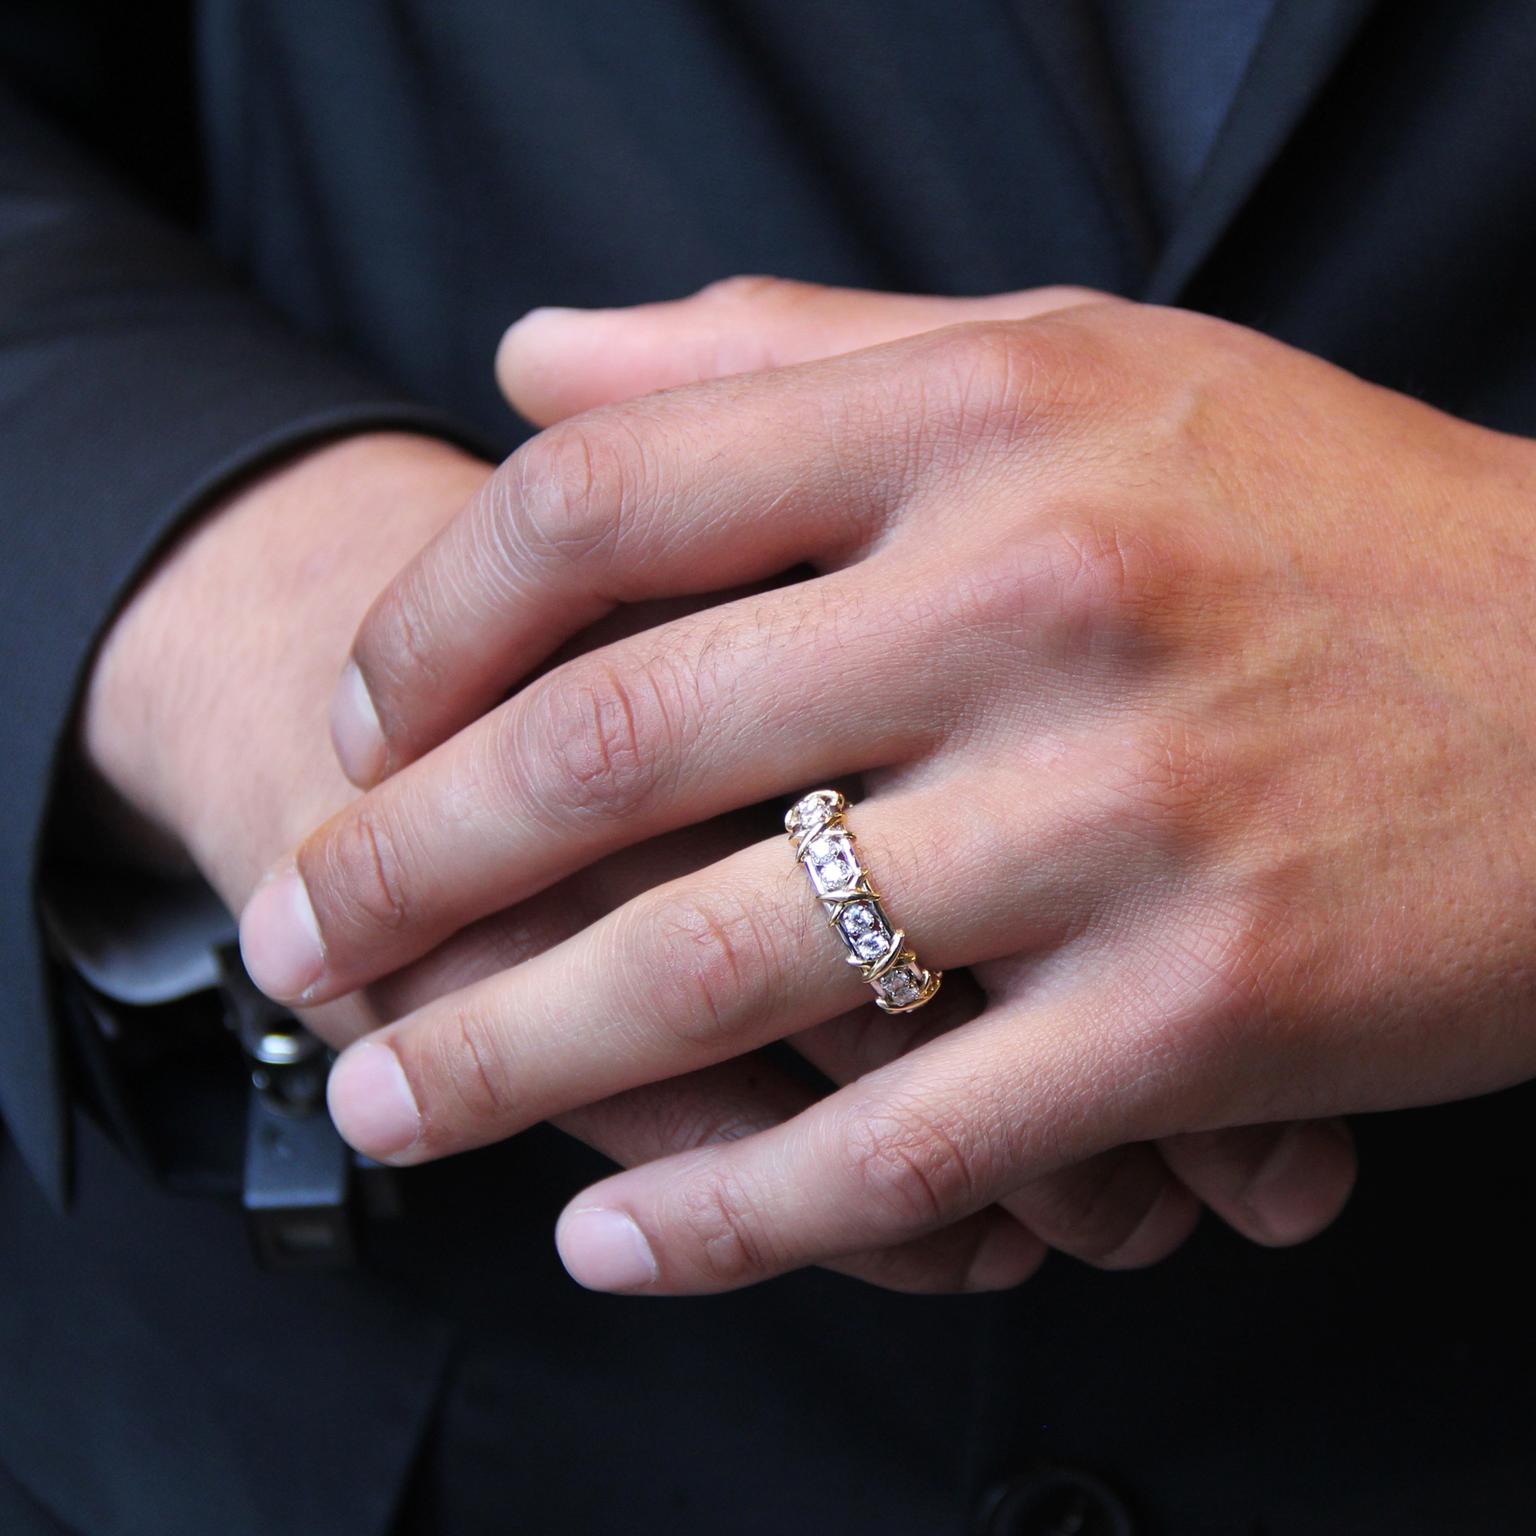 Time to shine: the best diamond engagement rings for gay men